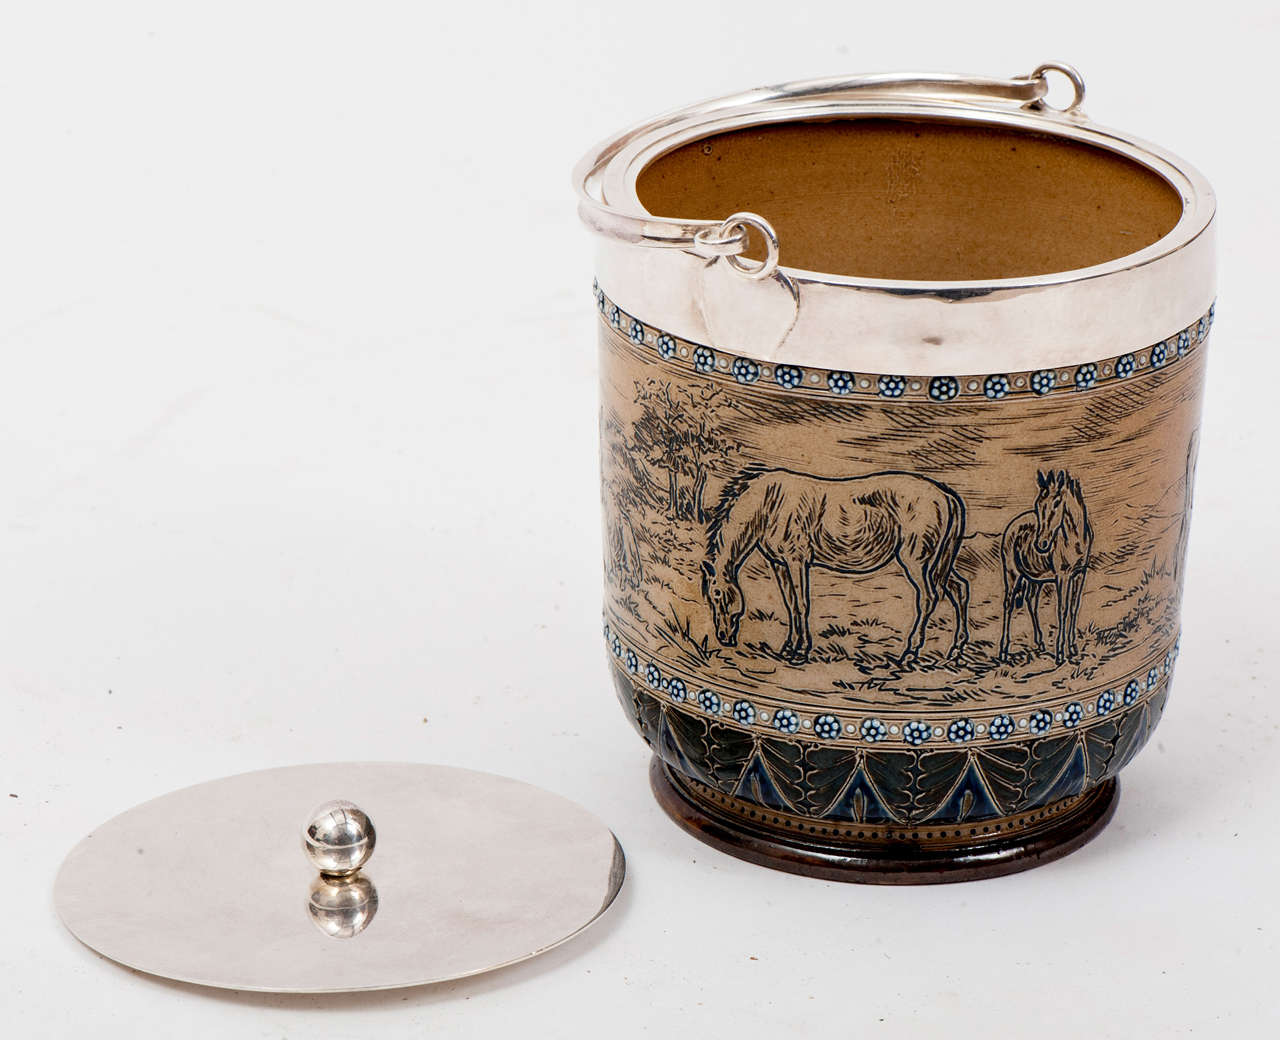 This fine saltglazed stoneware biscuit barrel from circa 1890 has Hannah Barlow's characteristic sgraffiti decoration of animals (in this case horses, donkeys and cows, both seated and standing) in a naturalistic landscape on a buff ground. The rim,